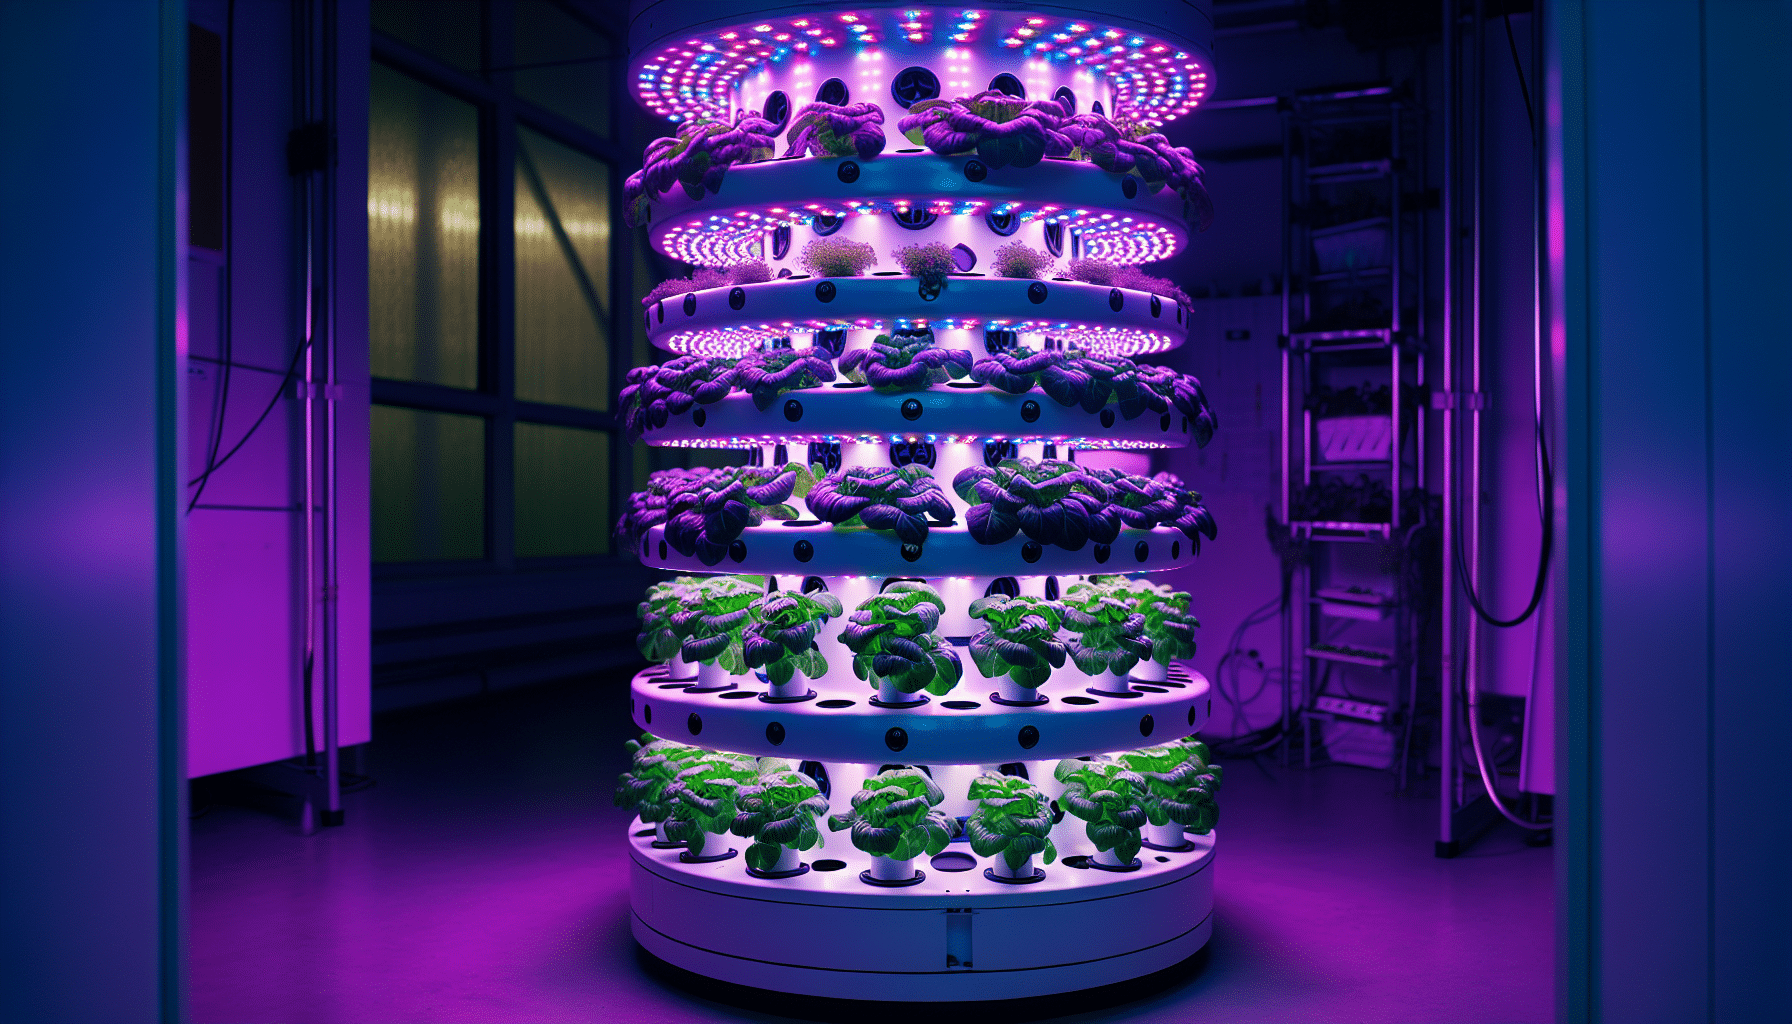 Setting up LED grow lights for planting in hydroponic garden tower